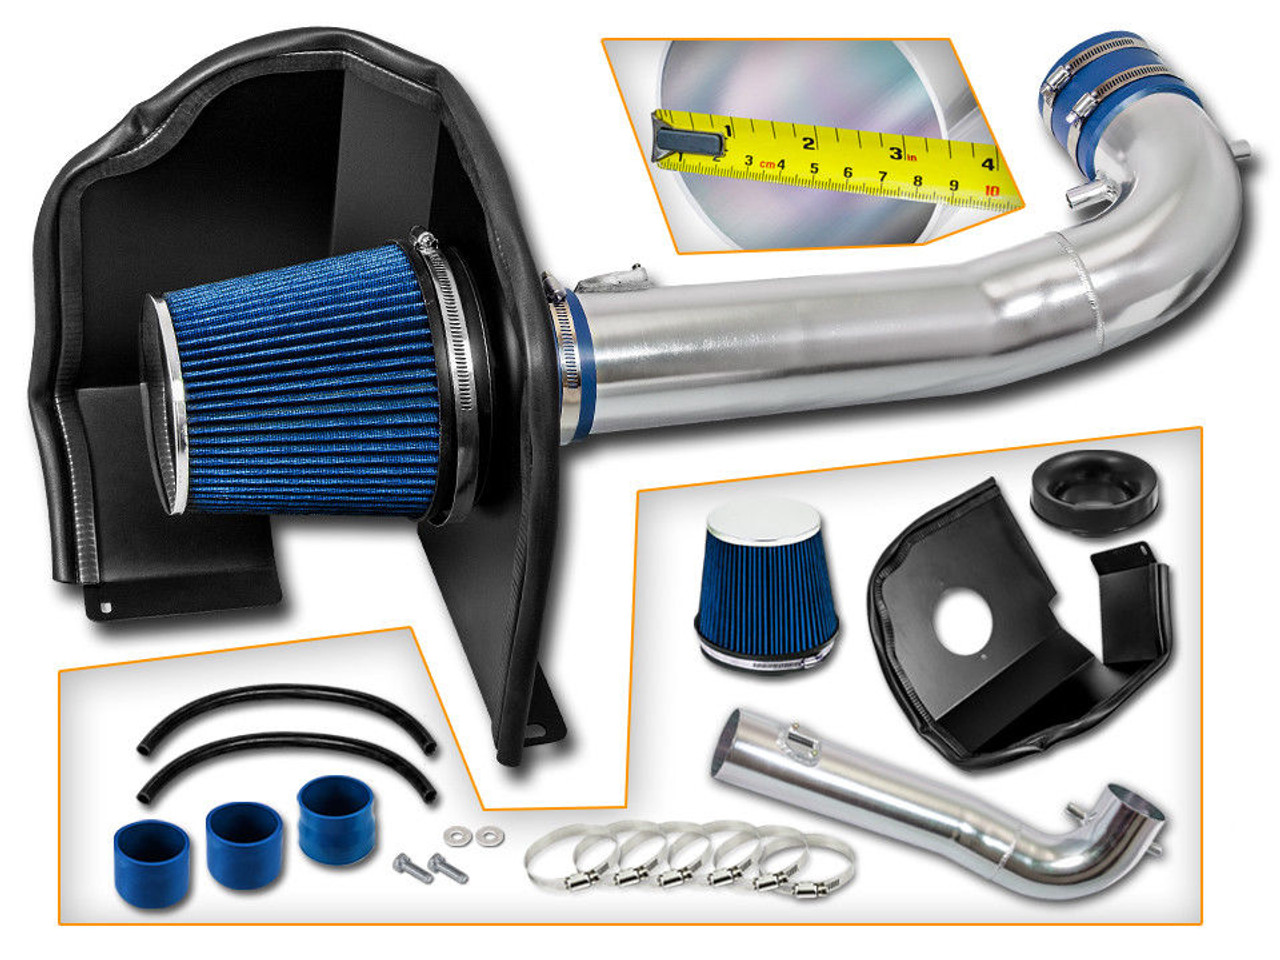 Cold Air Intake Kit for GMC Sierra 1500 (2014-2019) with 5.3L / 6.2L V8 Engine Blue 2019 Gmc Sierra At4 Cold Air Intake